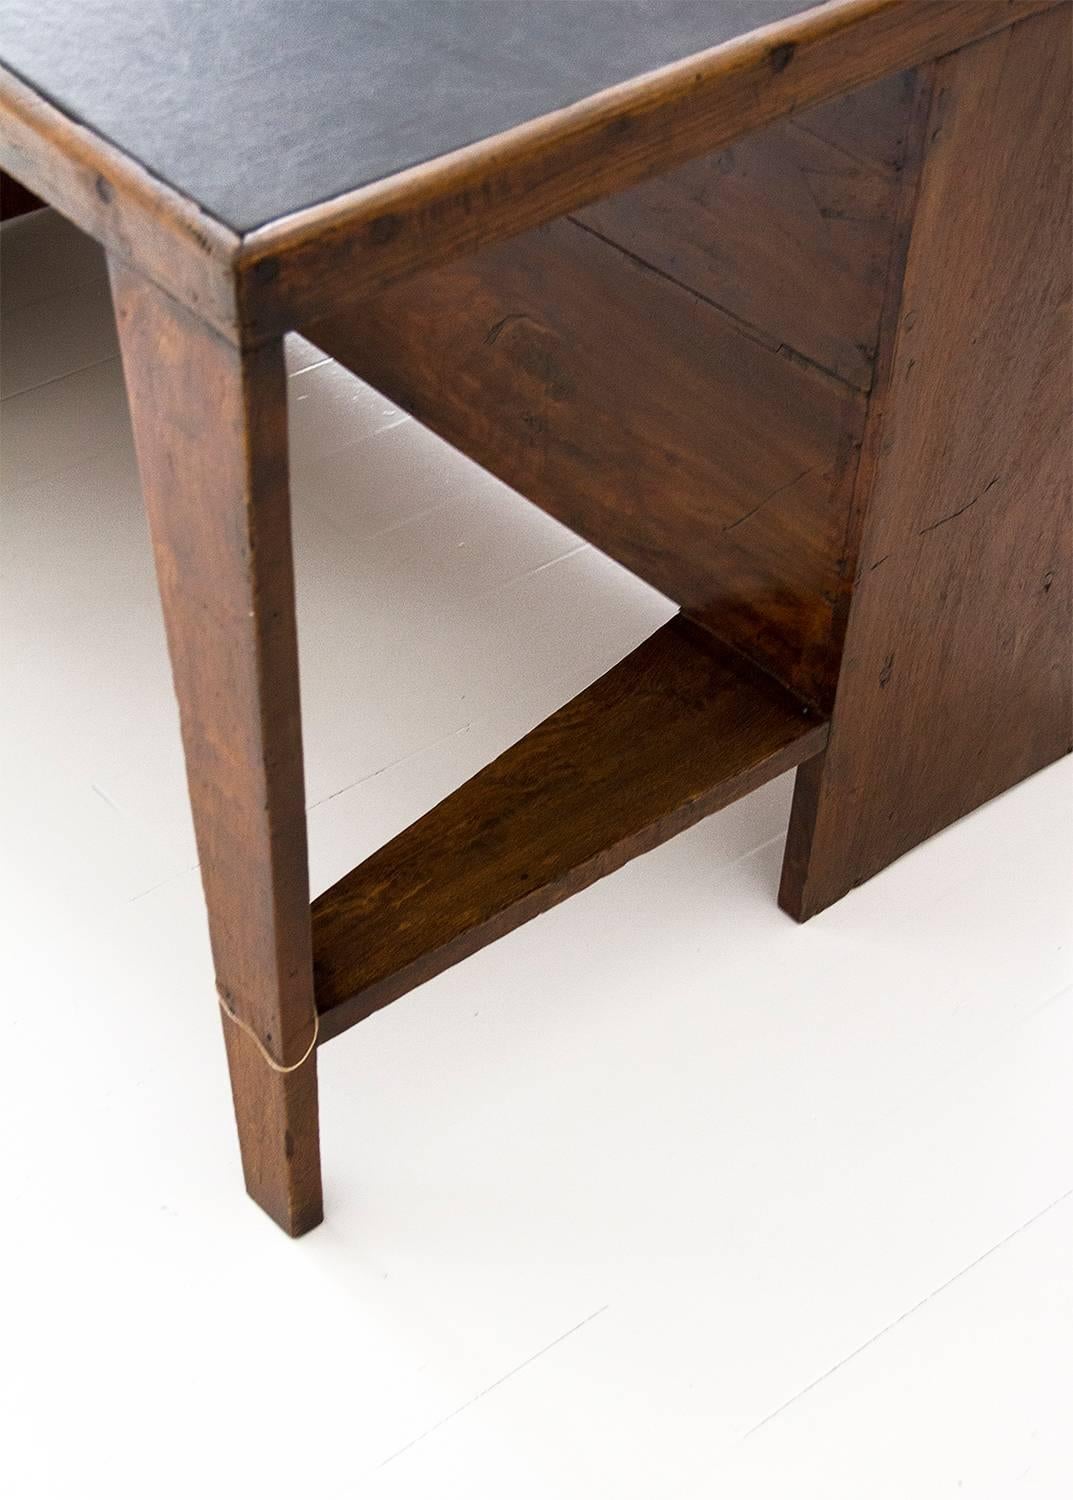 Indian Pierre Jeanneret Office Desk for Chandigarh, Wood and Leather, circa 1950, India For Sale